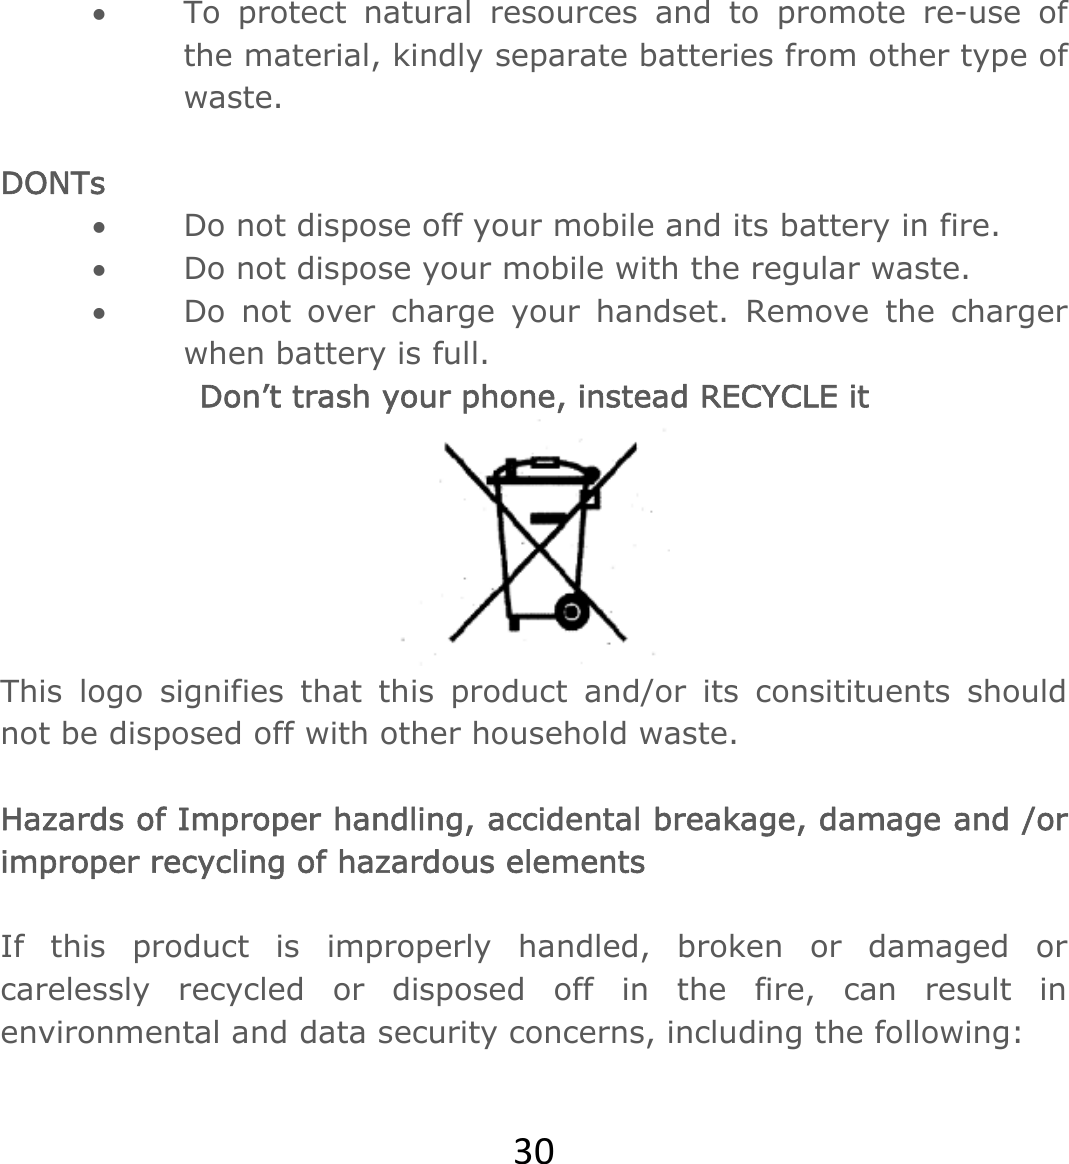 30 To protect natural resources and to promote re-use of the material, kindly separate batteries from other type of waste.   DONTs  Do not dispose off your mobile and its battery in fire.   Do not dispose your mobile with the regular waste.   Do not over charge your handset. Remove the charger when battery is full. Don’t trash your phone, instead RECYCLE it  This logo signifies that this product and/or its consitituents should not be disposed off with other household waste.   Hazards of Improper handling, accidental breakage, damage and /or improper recycling of hazardous elements  If this product is improperly handled, broken or damaged or carelessly recycled or disposed off in the fire, can result in environmental and data security concerns, including the following:  